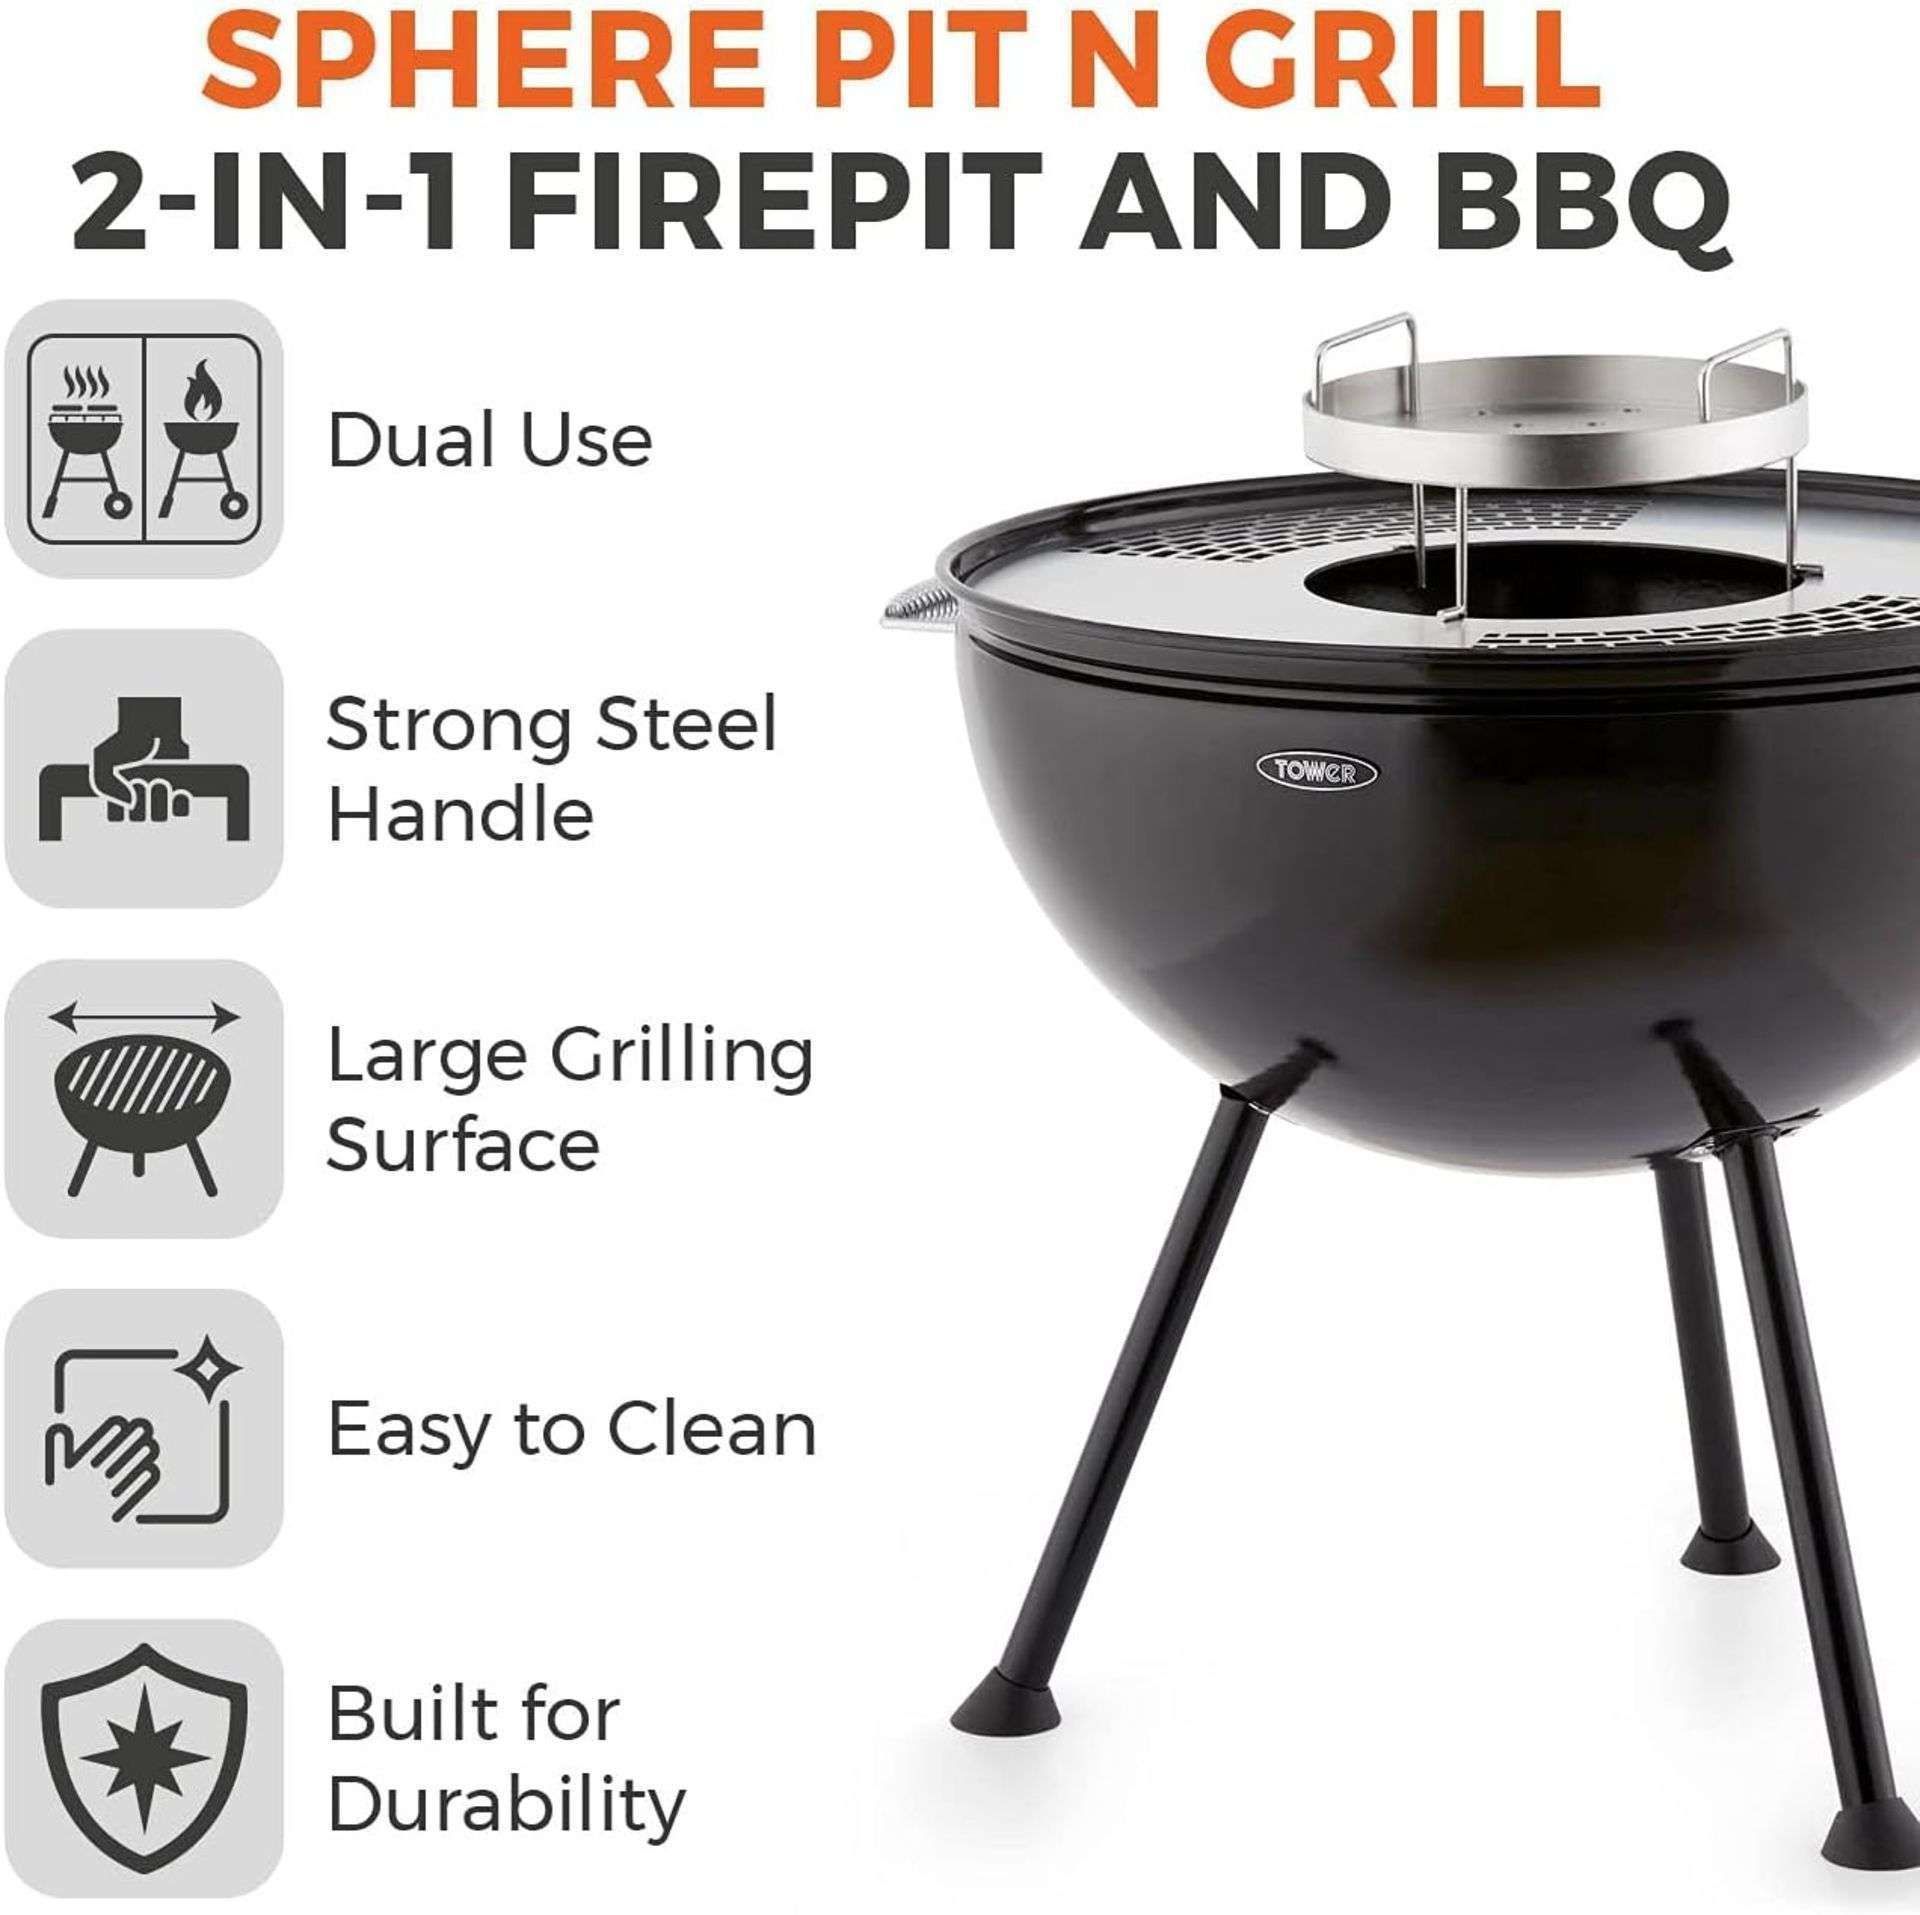 New & Boxed Tower Sphere Fire Pit and BBQ Grill, Black. (VQ577). DUAL USE â€“ This multi- - Bild 2 aus 5